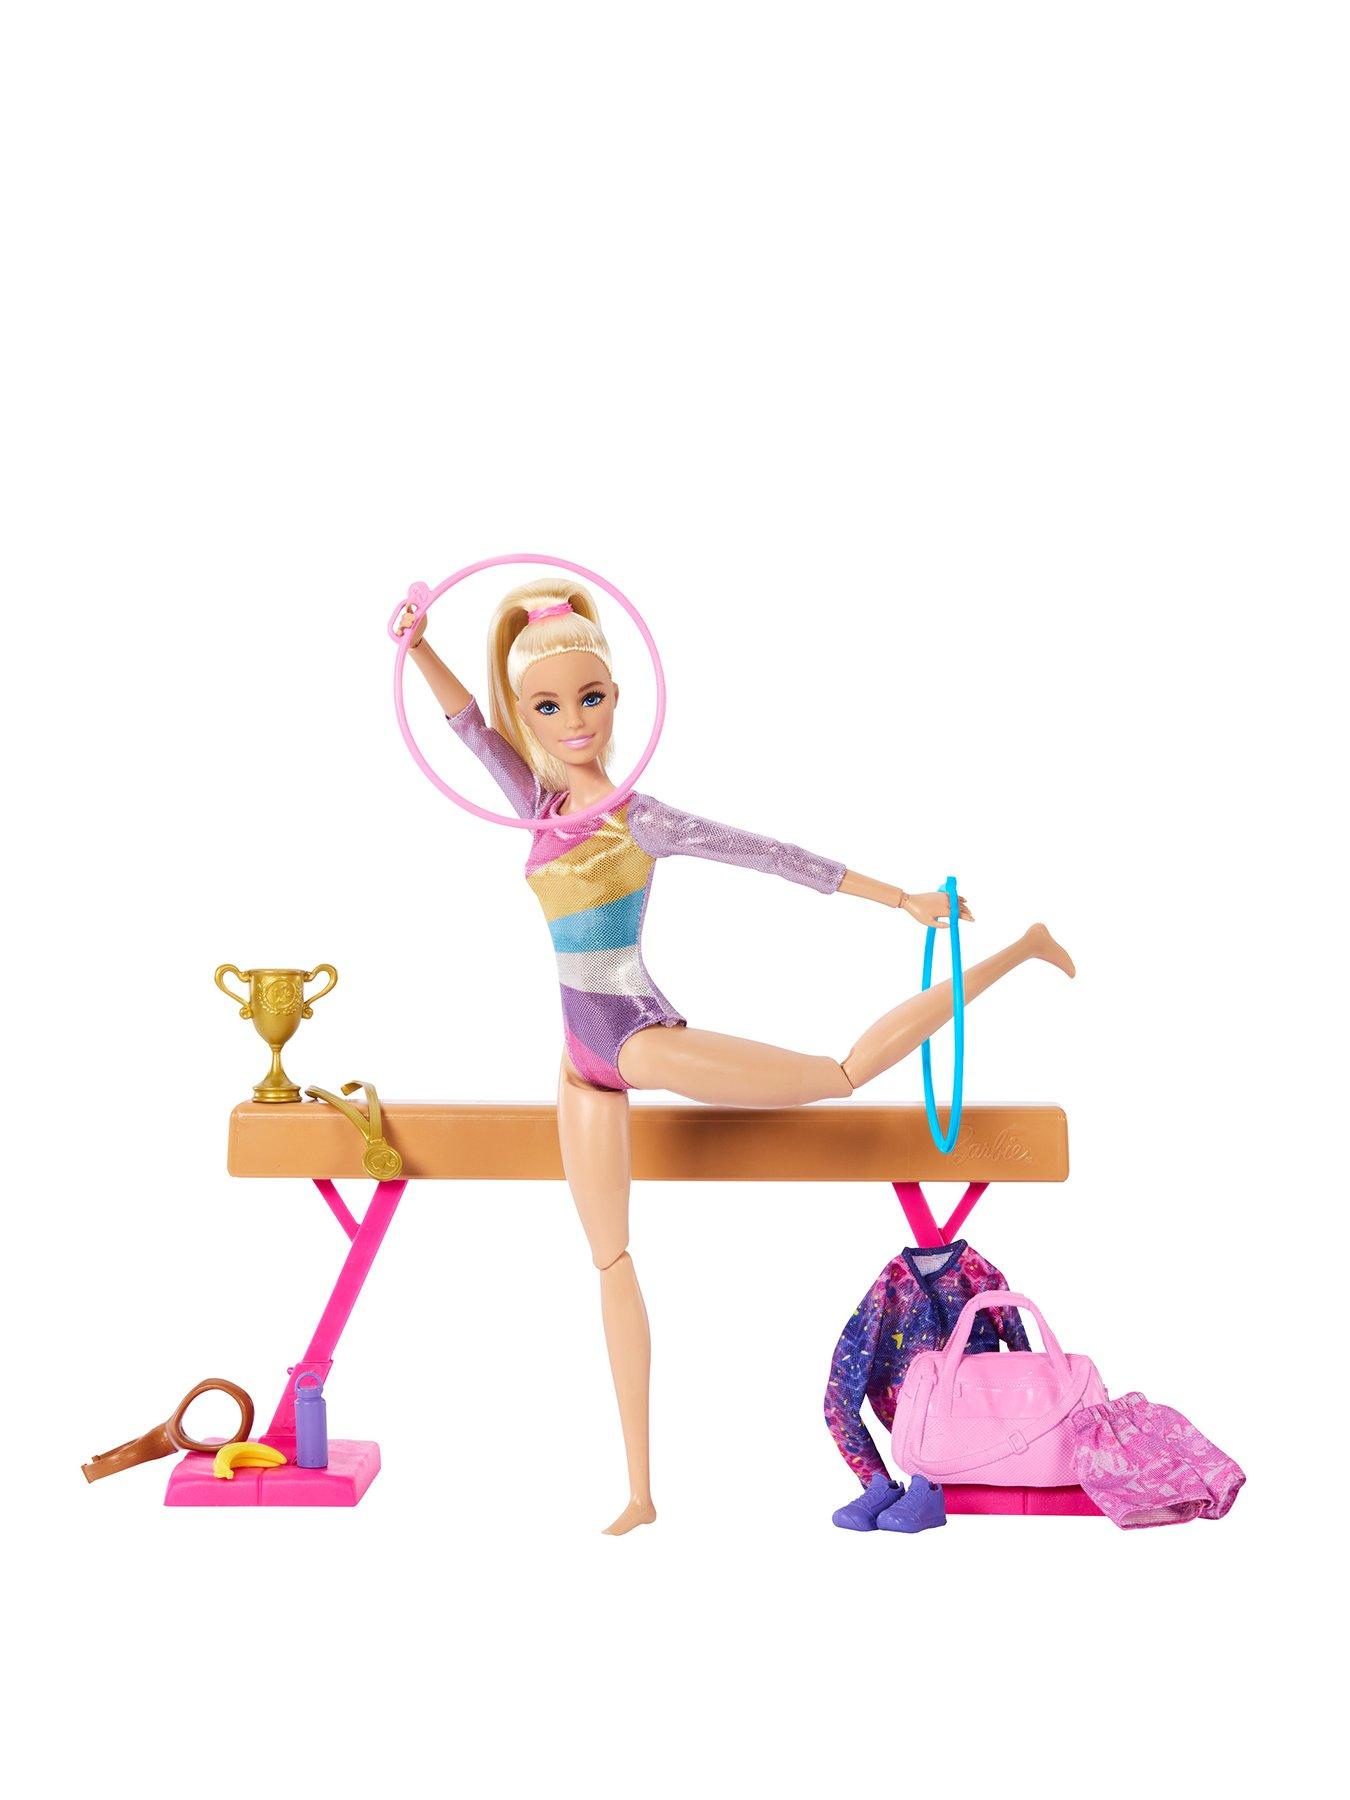 Barbie Gymnastics Playset, Doll and Accessories